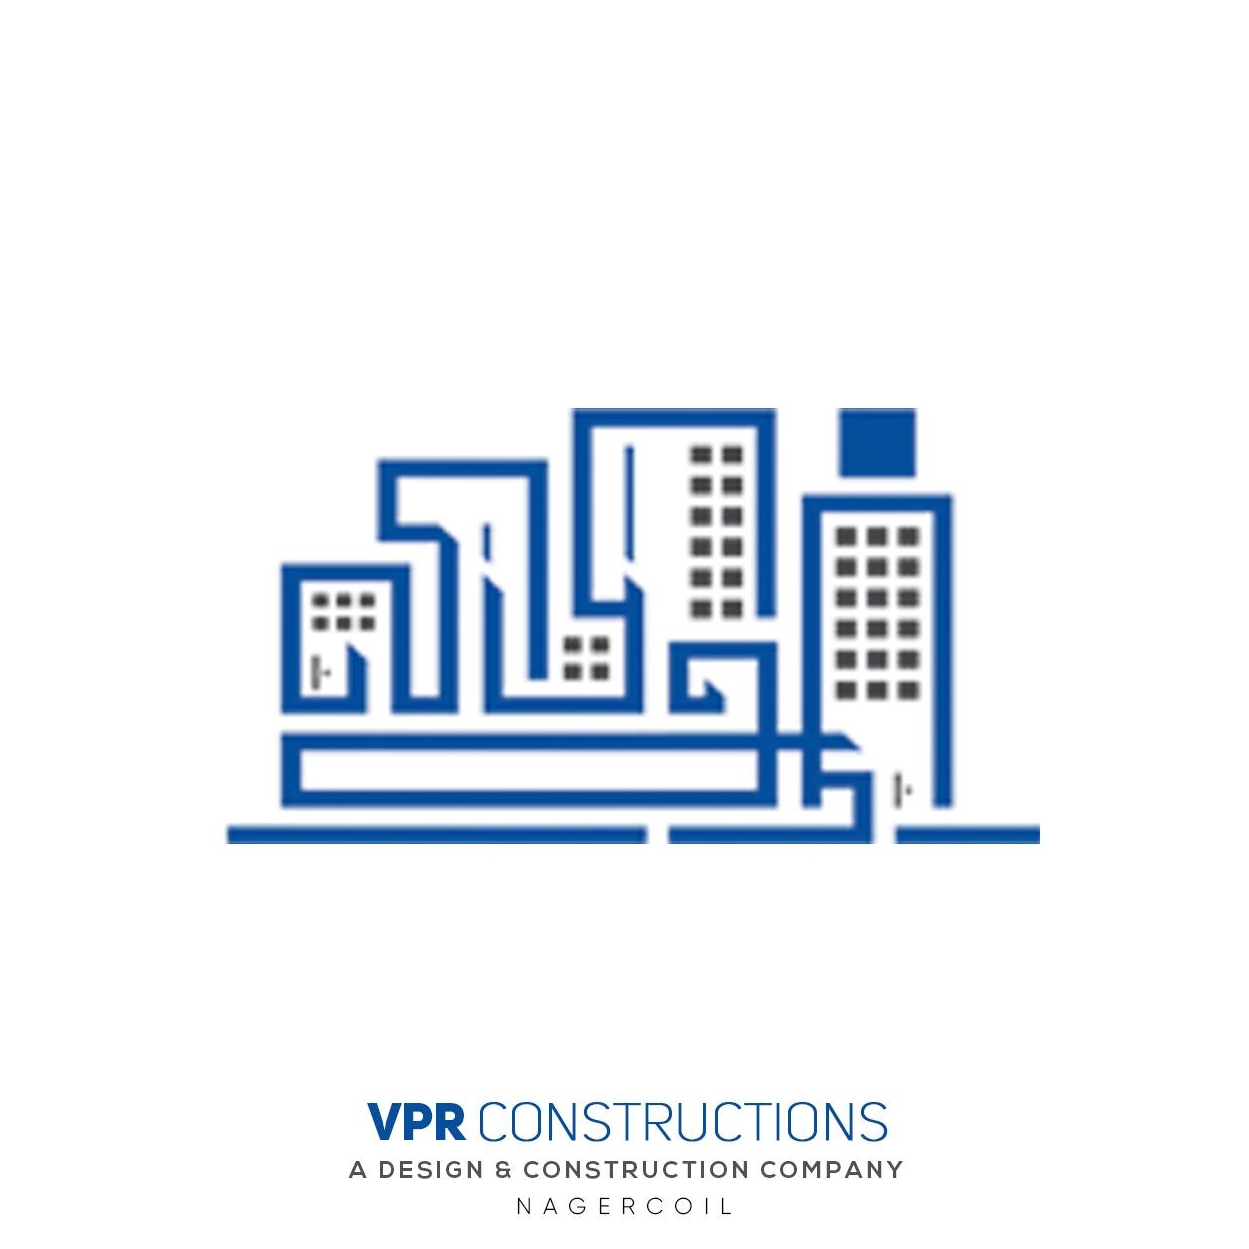 VPR CONSTRUCTIONS|Legal Services|Professional Services